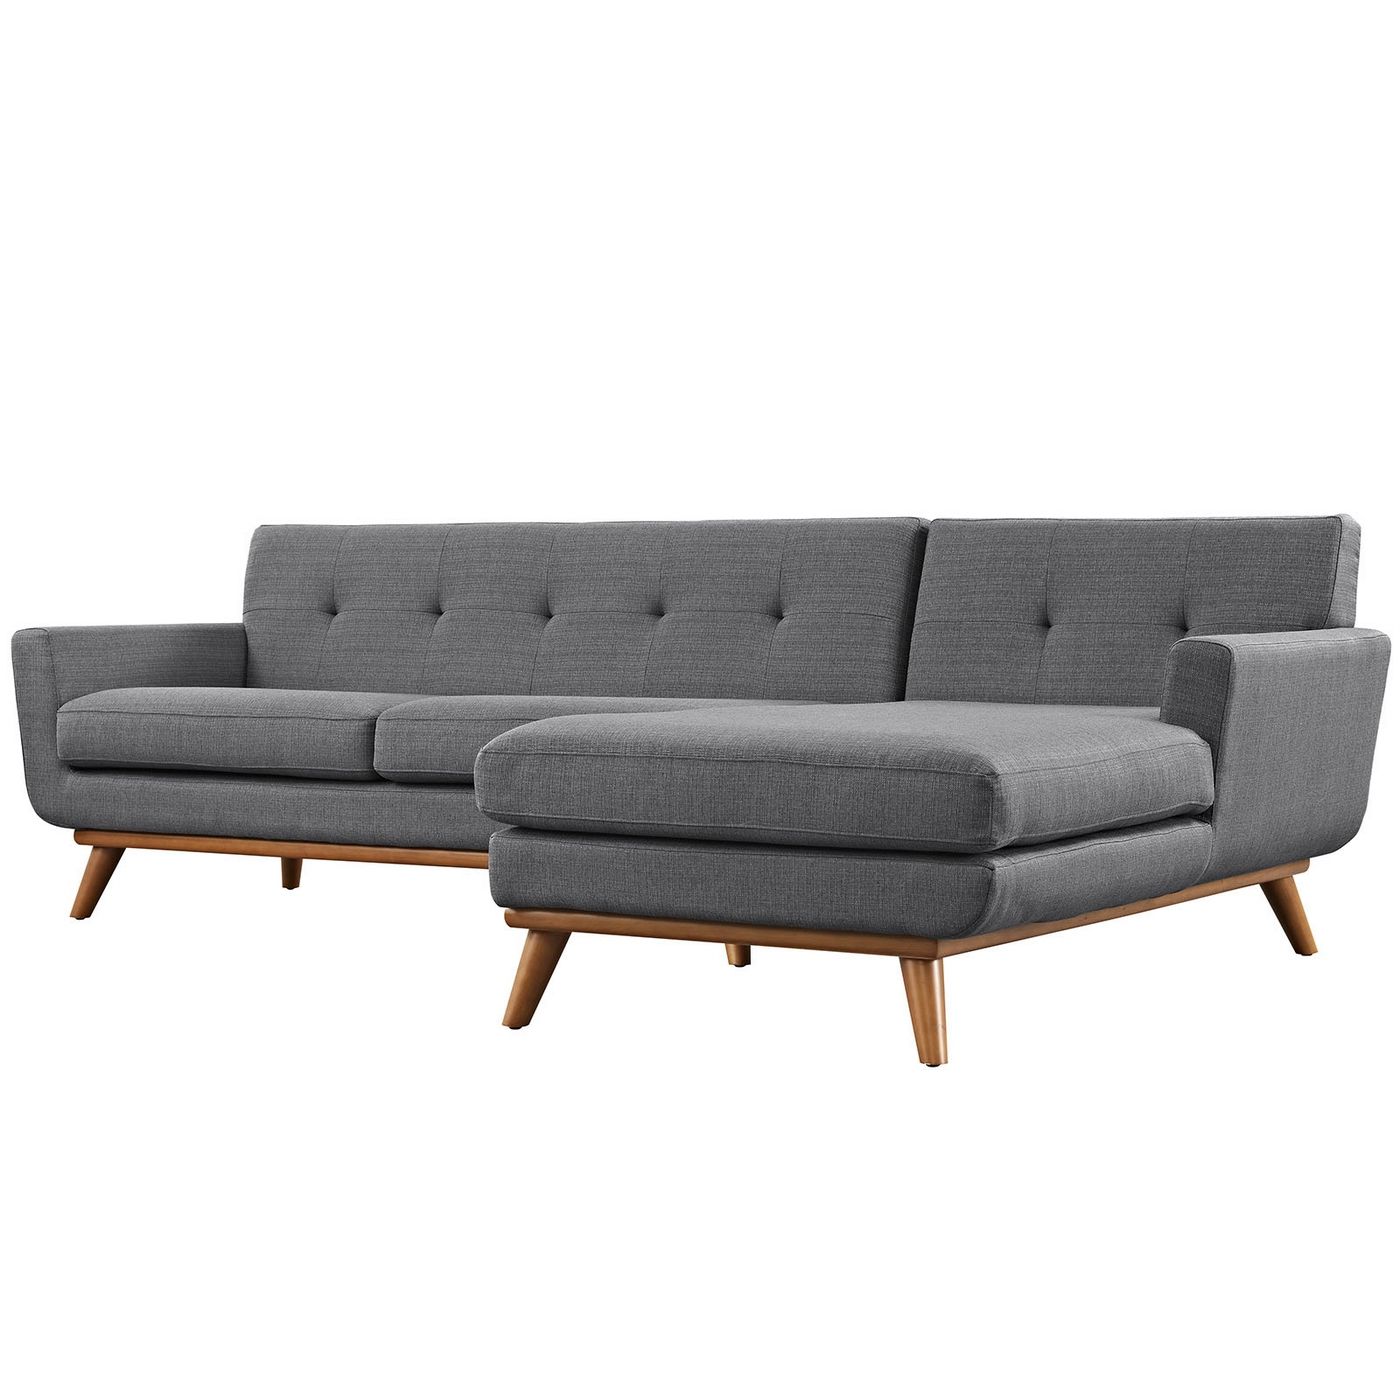 Well Known Florence Mid Century Modern Left Sectional Sofas Inside Mid Century Modern Engage Left Facing Sectional Sofa W (View 16 of 25)